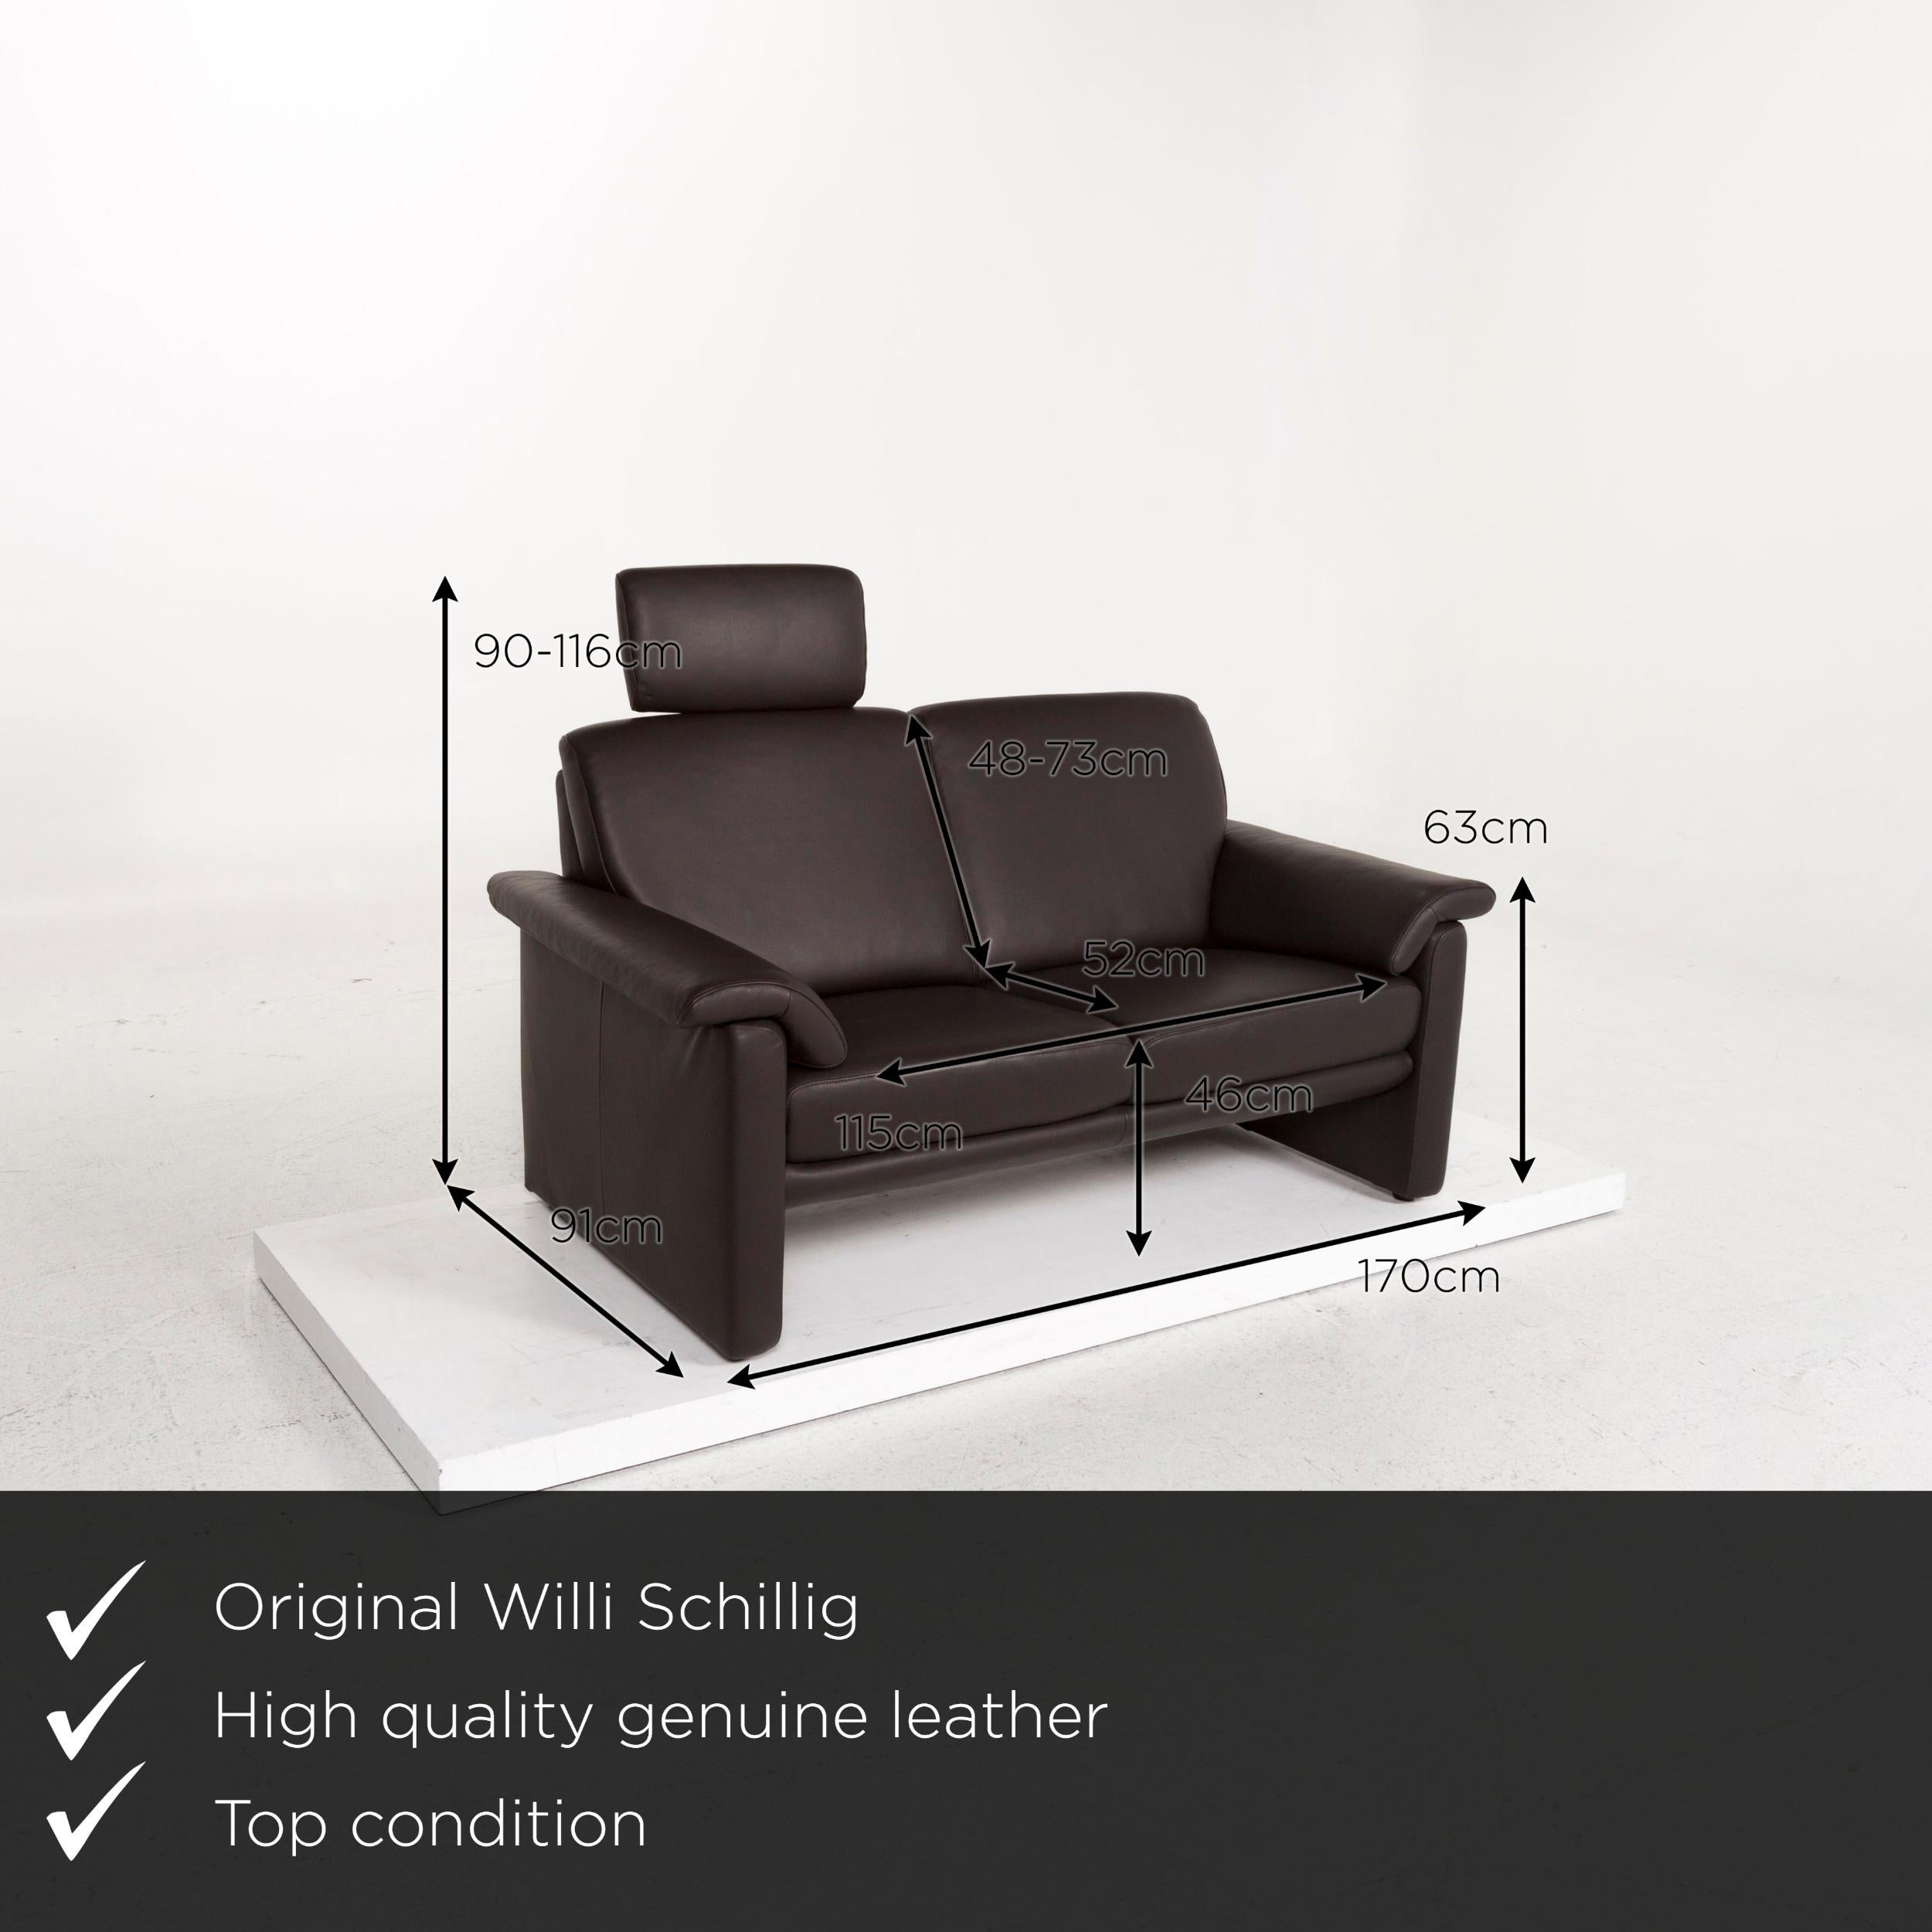 We present to you a Willi Schillig leather sofa brown dark brown two-seat couch.
 

 Product measurements in centimeters:
 

Depth 91
Width 170
Height 90
Seat height 46
Rest height 63
Seat depth 52
Seat width 115
Back height 48.

 